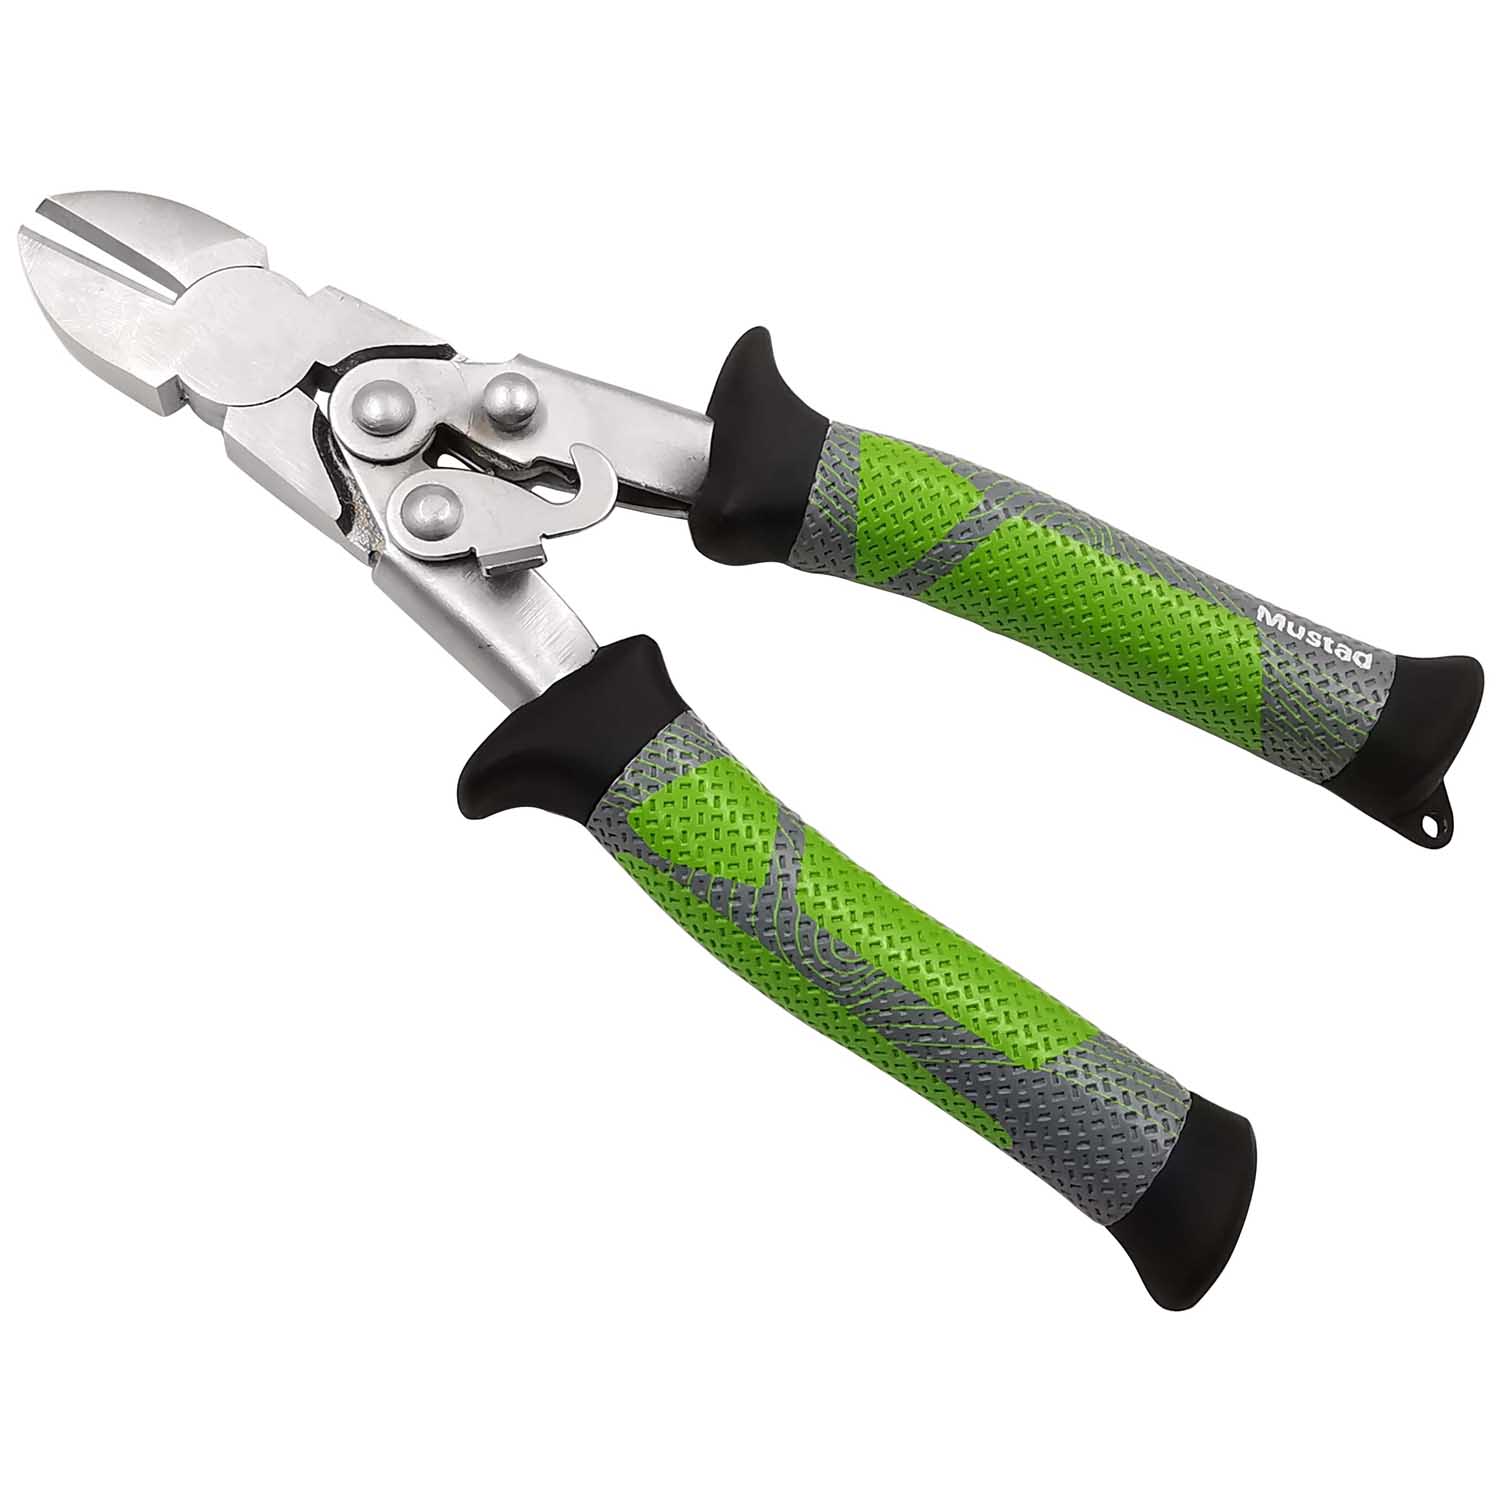 Mustad Fishing 8 Double Leverage Side Cutter Plier - Green MT116 -  Showspace